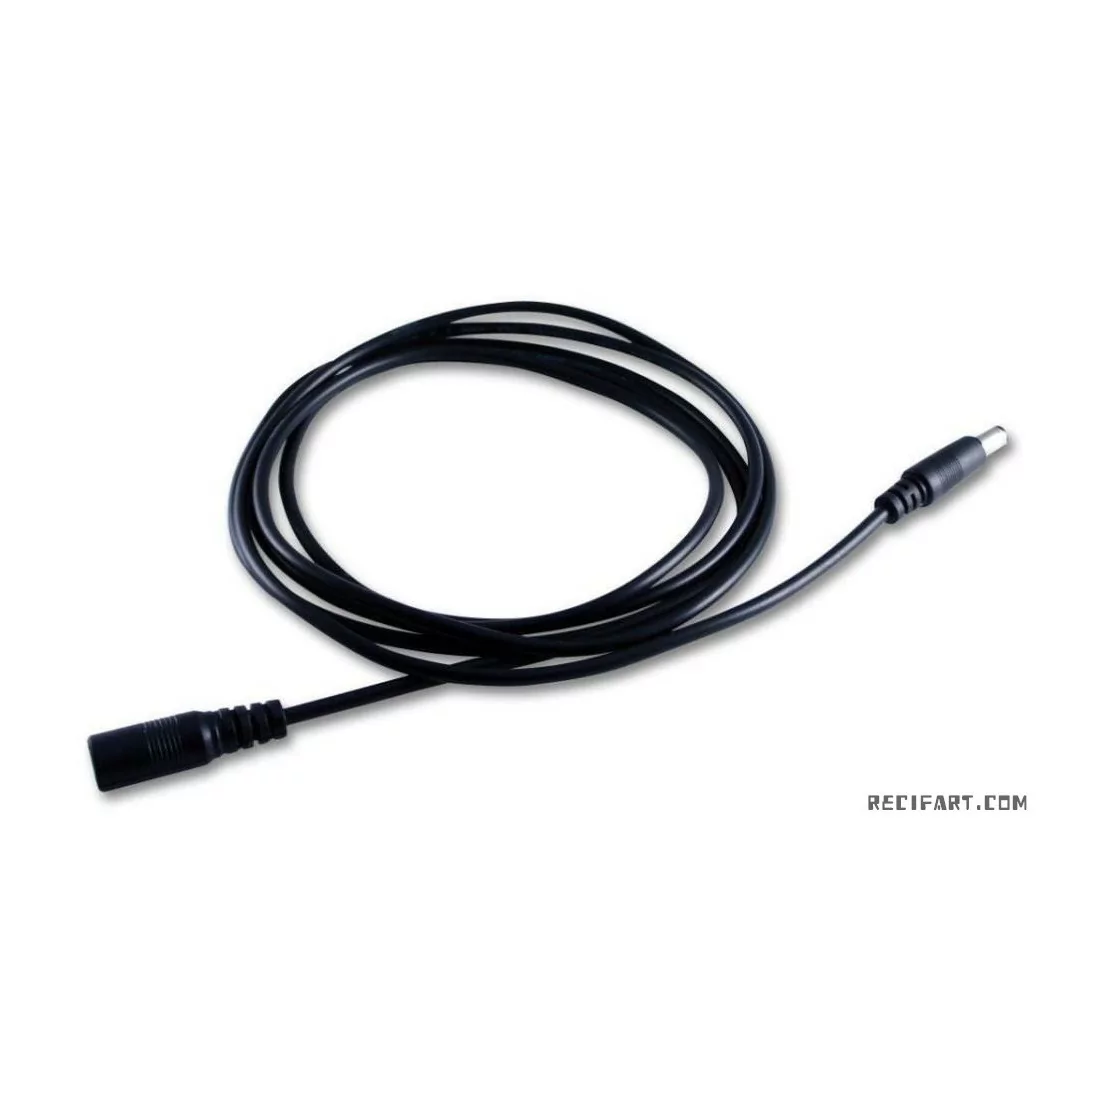 Extension cable for power supply, 5M